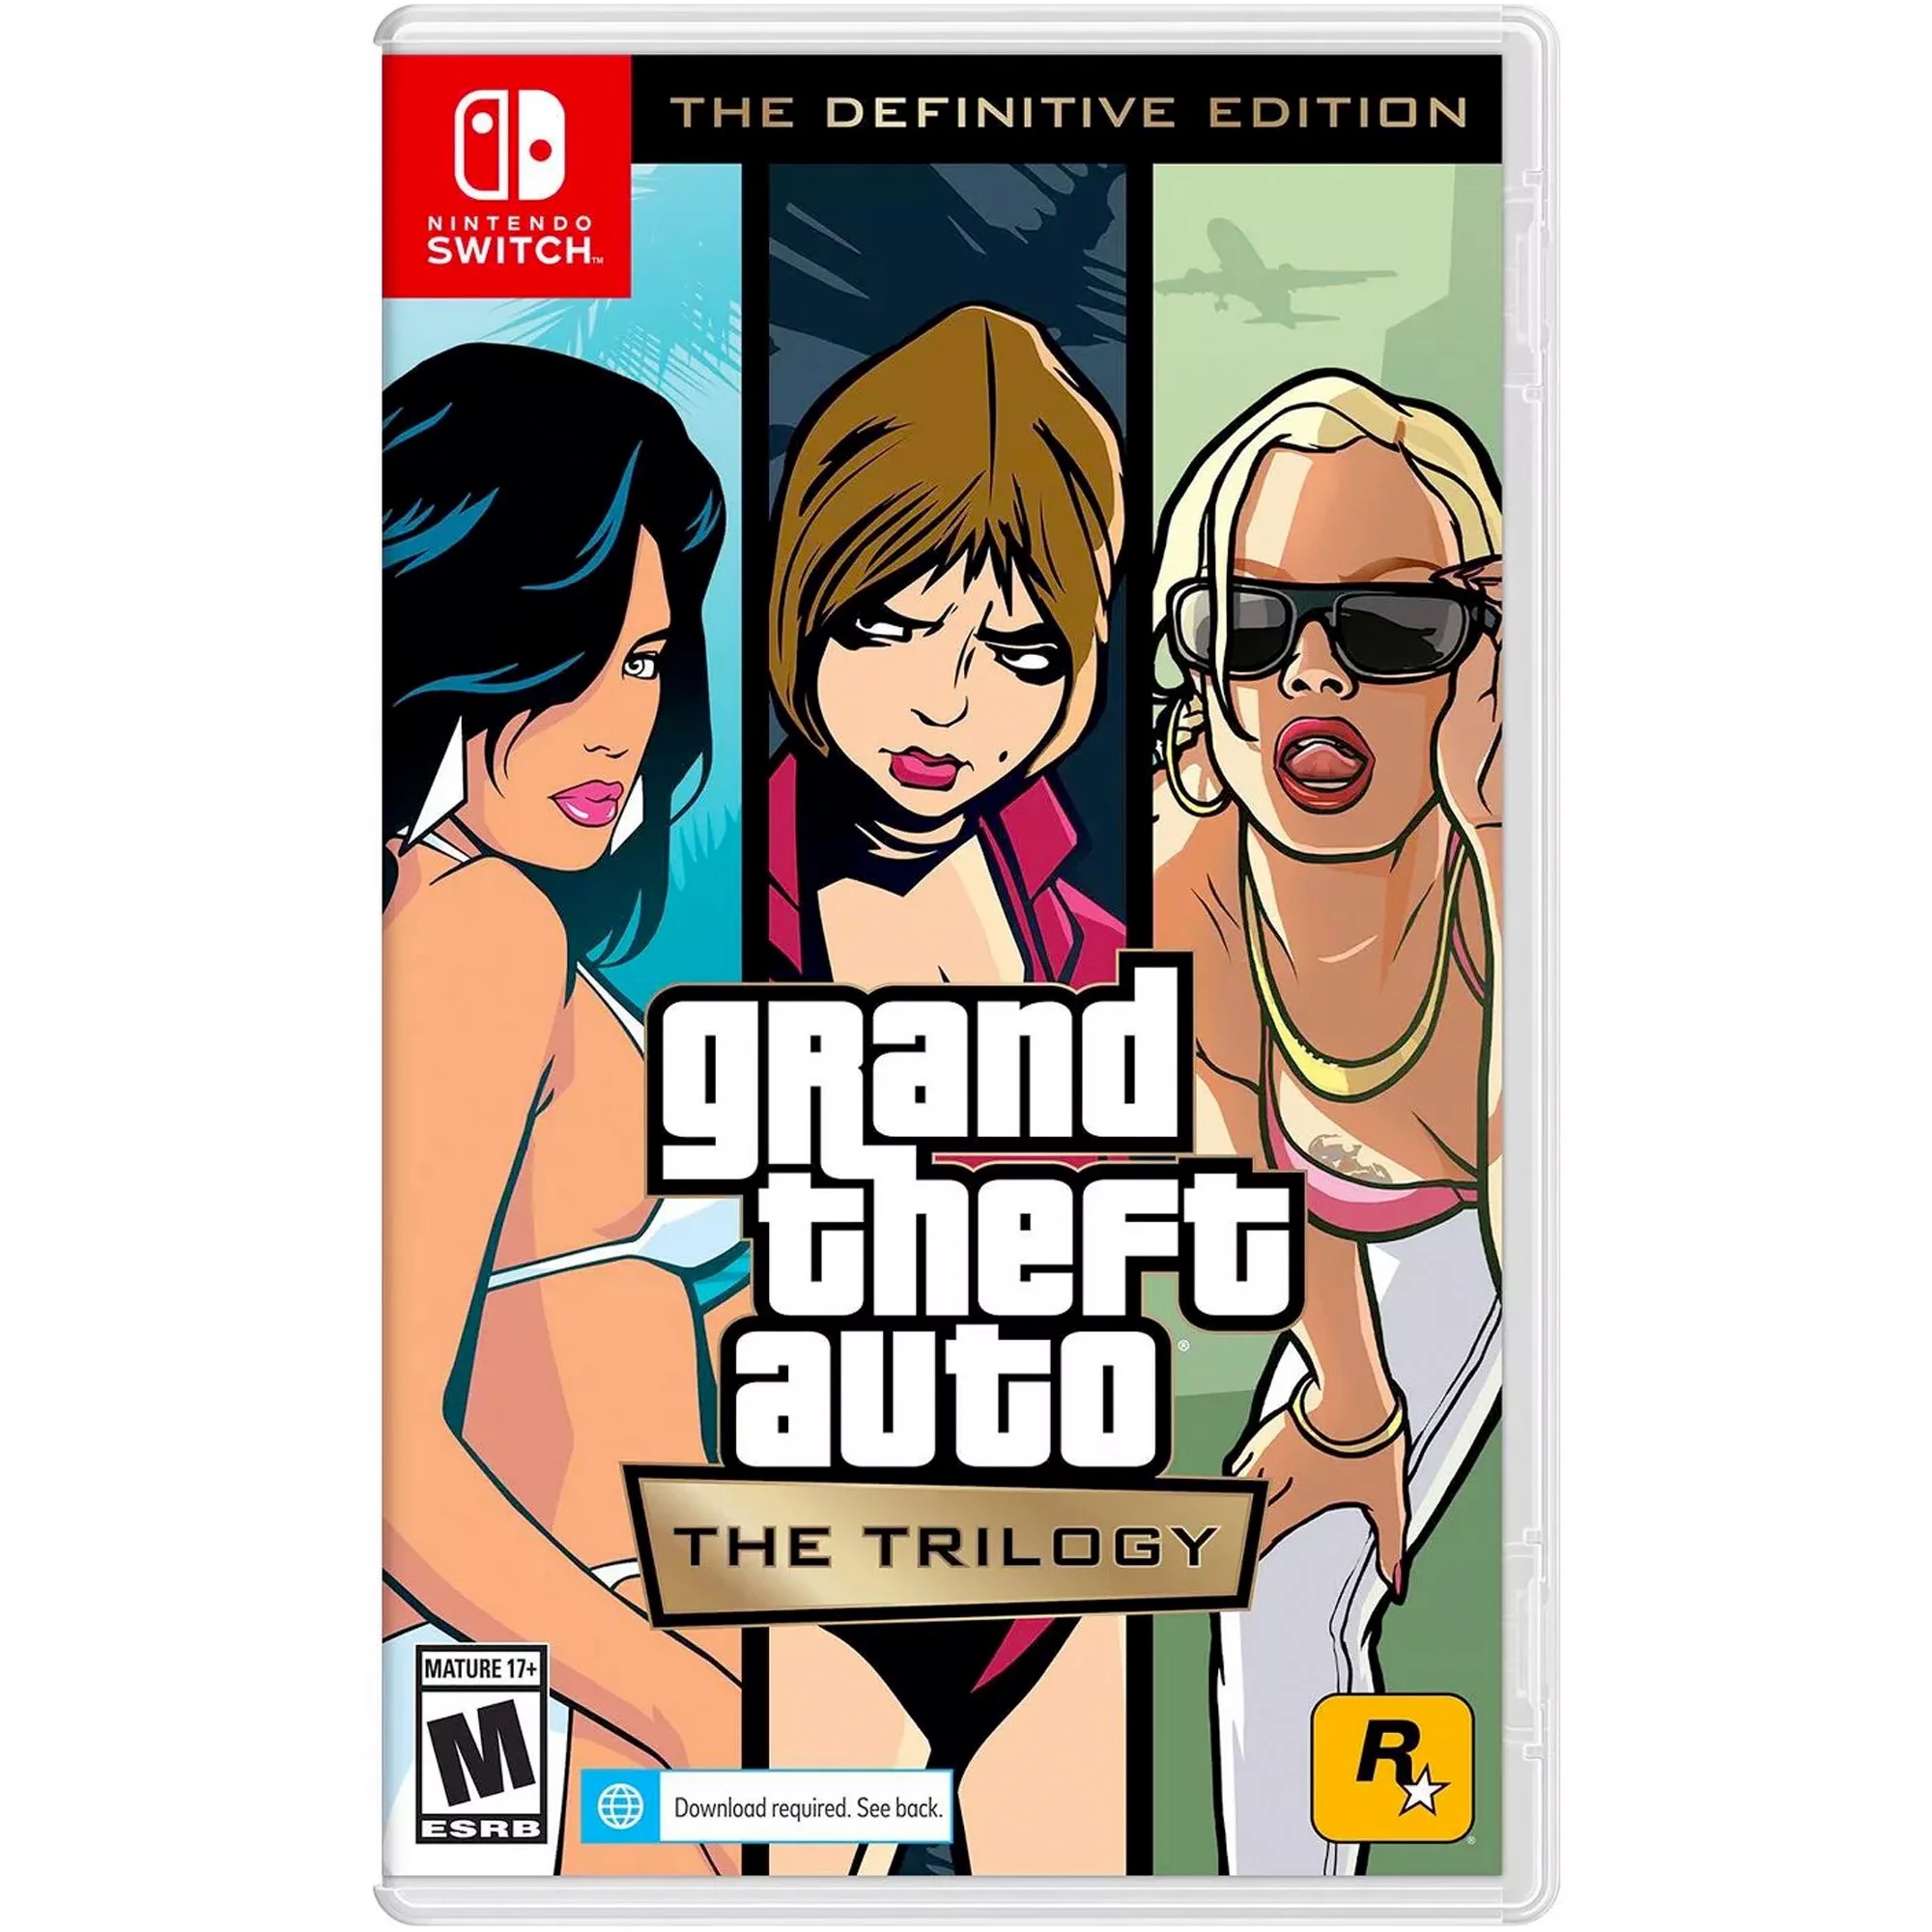 GRAND THEFT AUTO: THE TRILOGY - THE DEFINITIVE EDITION NSW